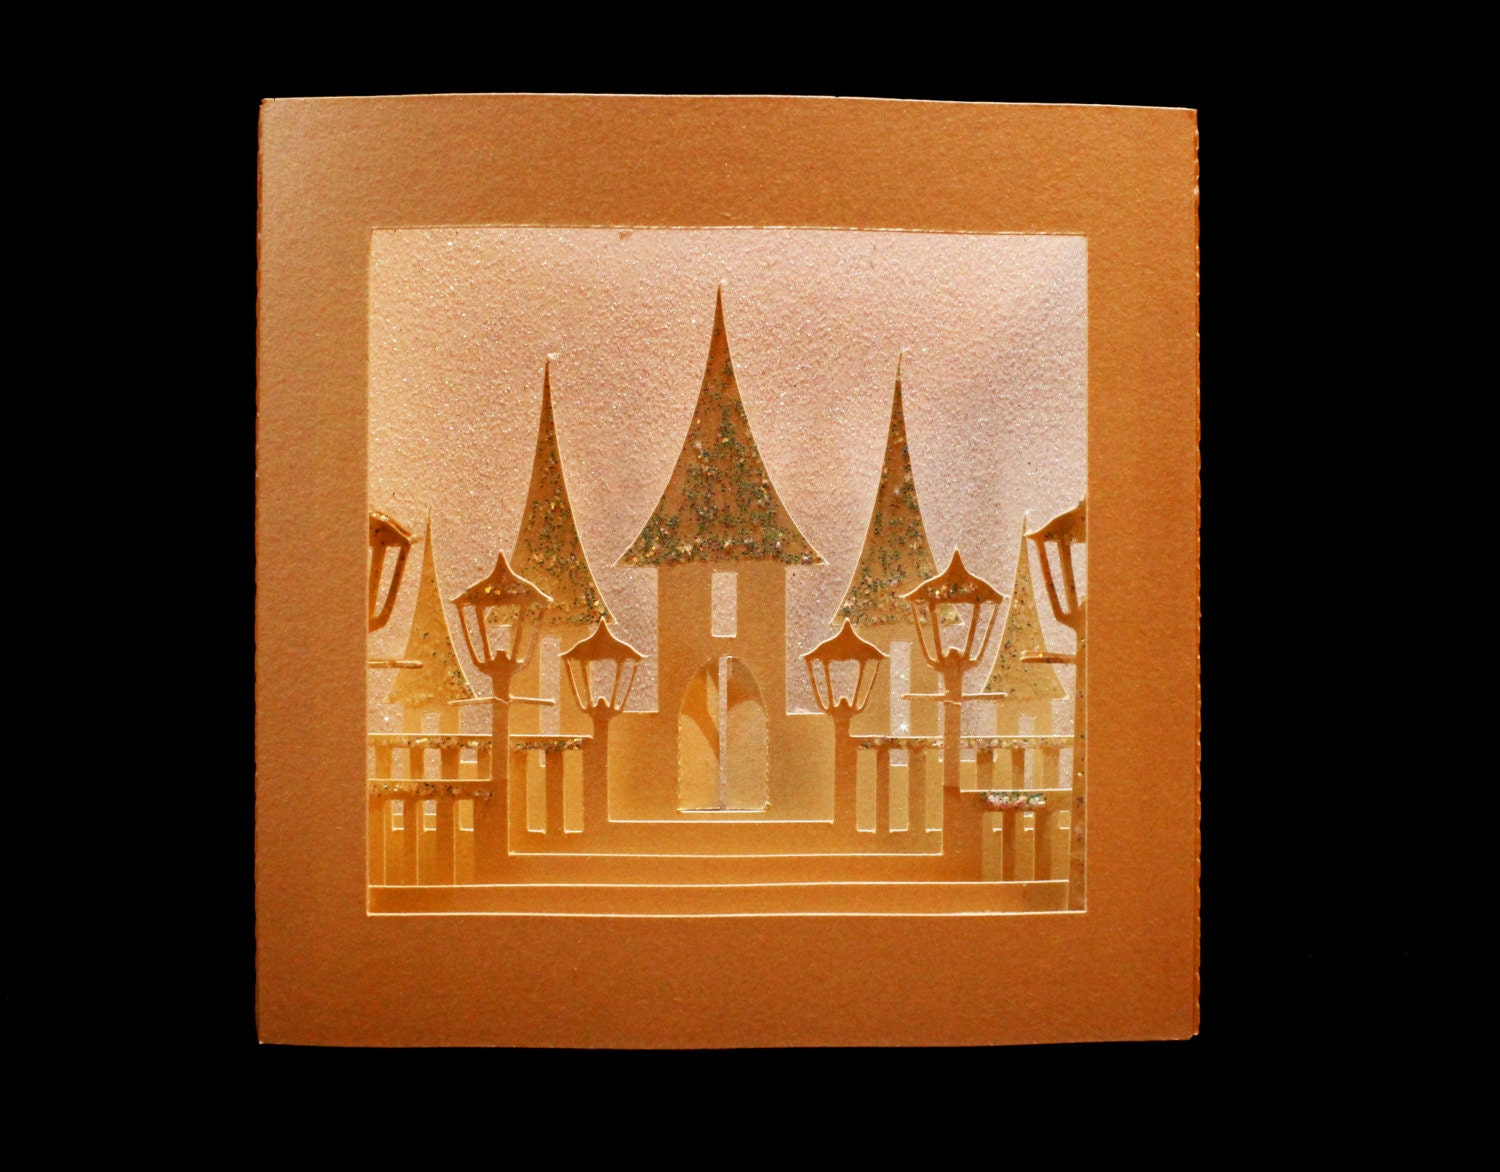 Download SVG 3D Fairy tale castle Christmas card by MySVGHUT on Etsy